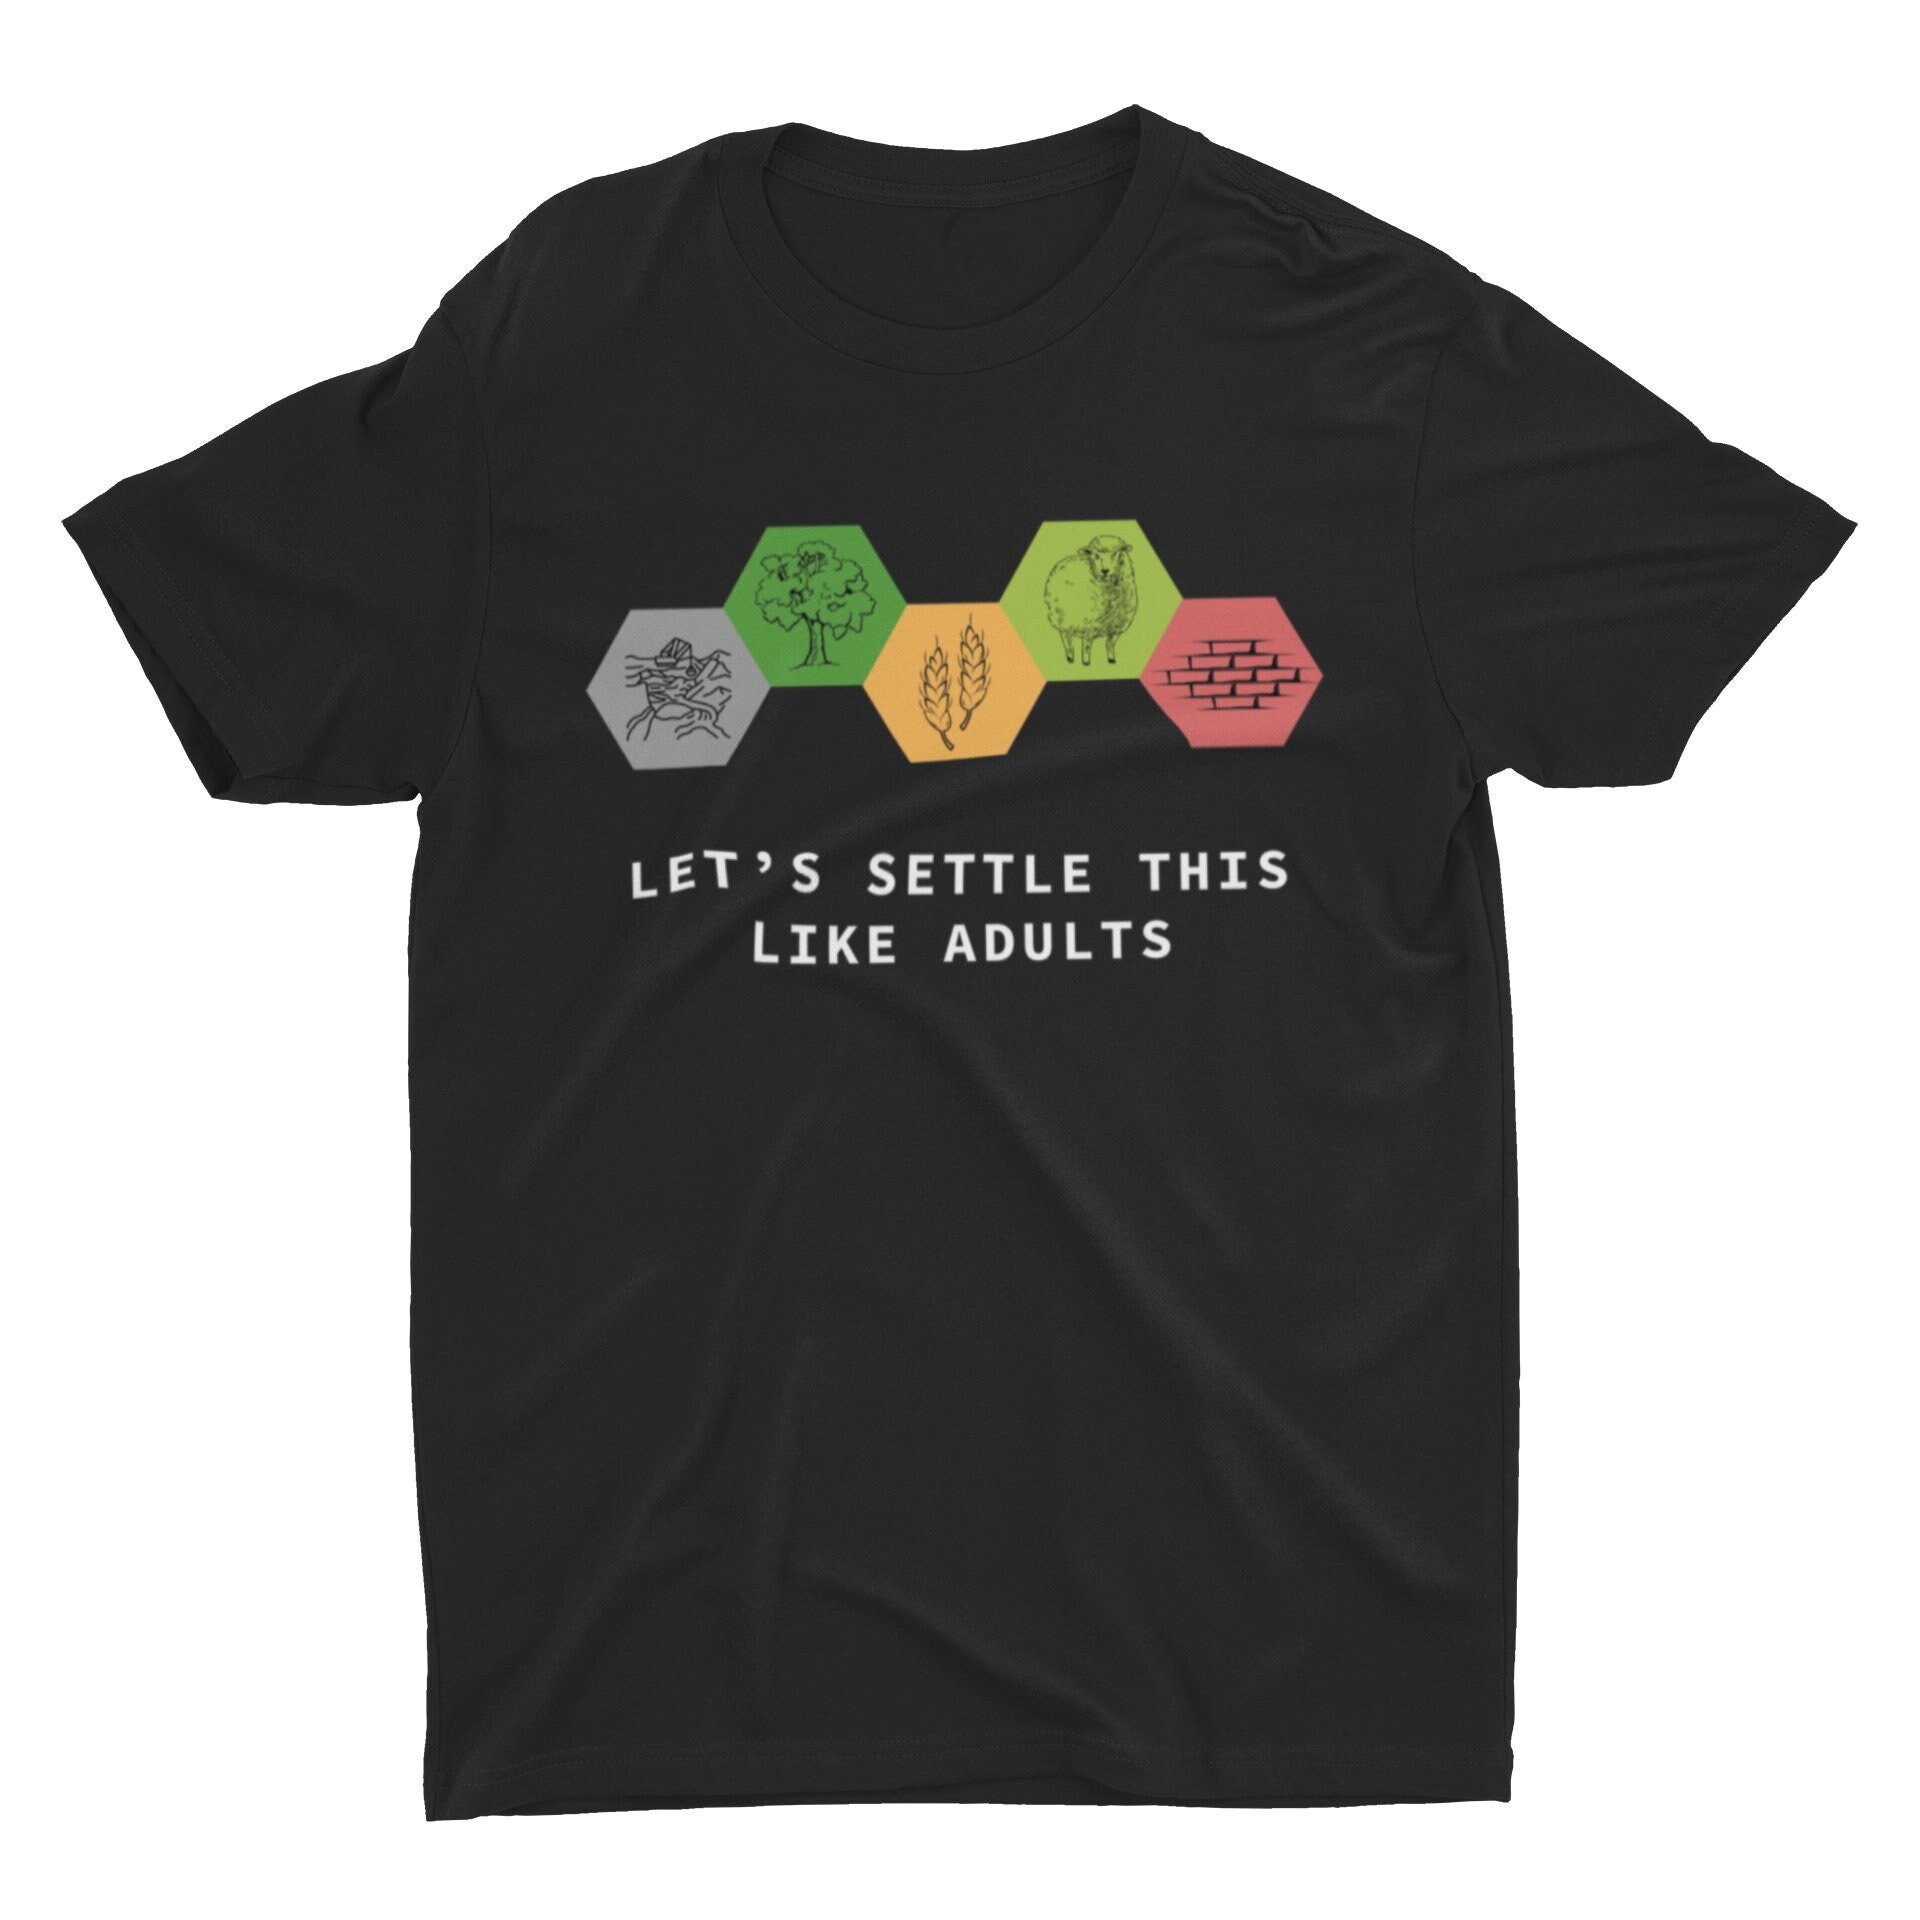 Settlers Of Catan Board Game. Lets Settle This Like Adults. Unisex T-Shirt